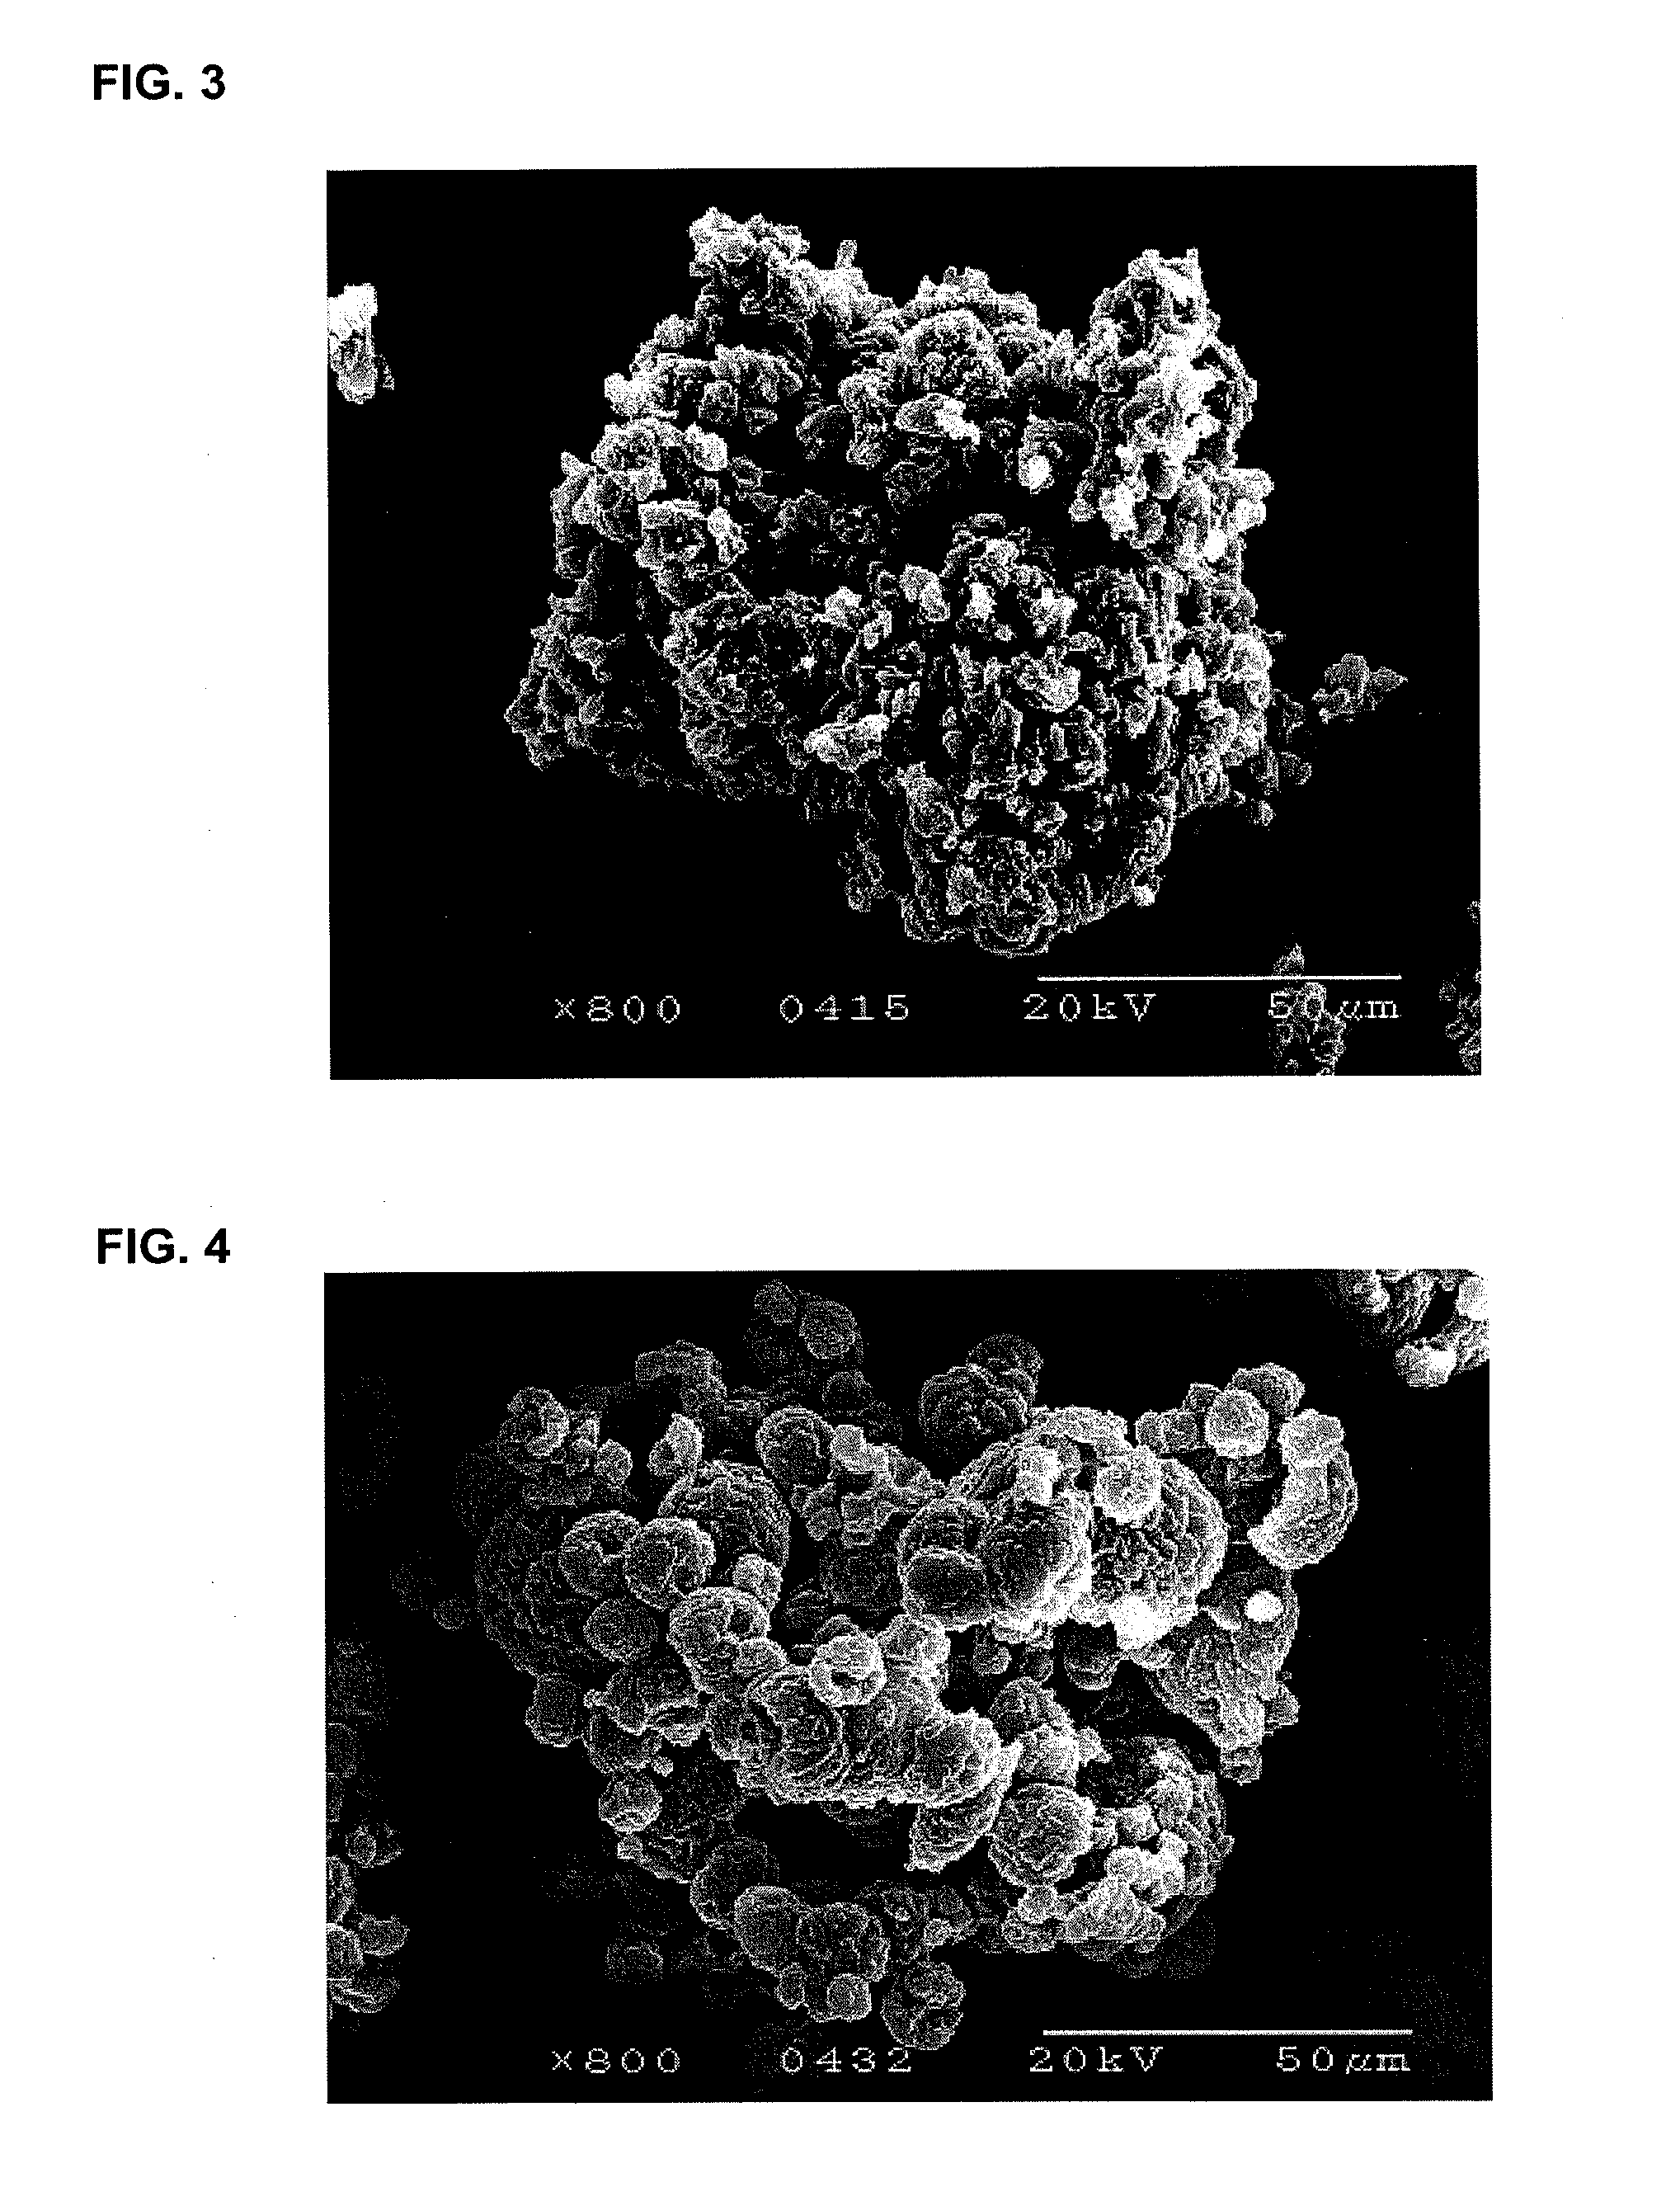 Revaprazan-containing solid dispersion and process for the preparation thereof